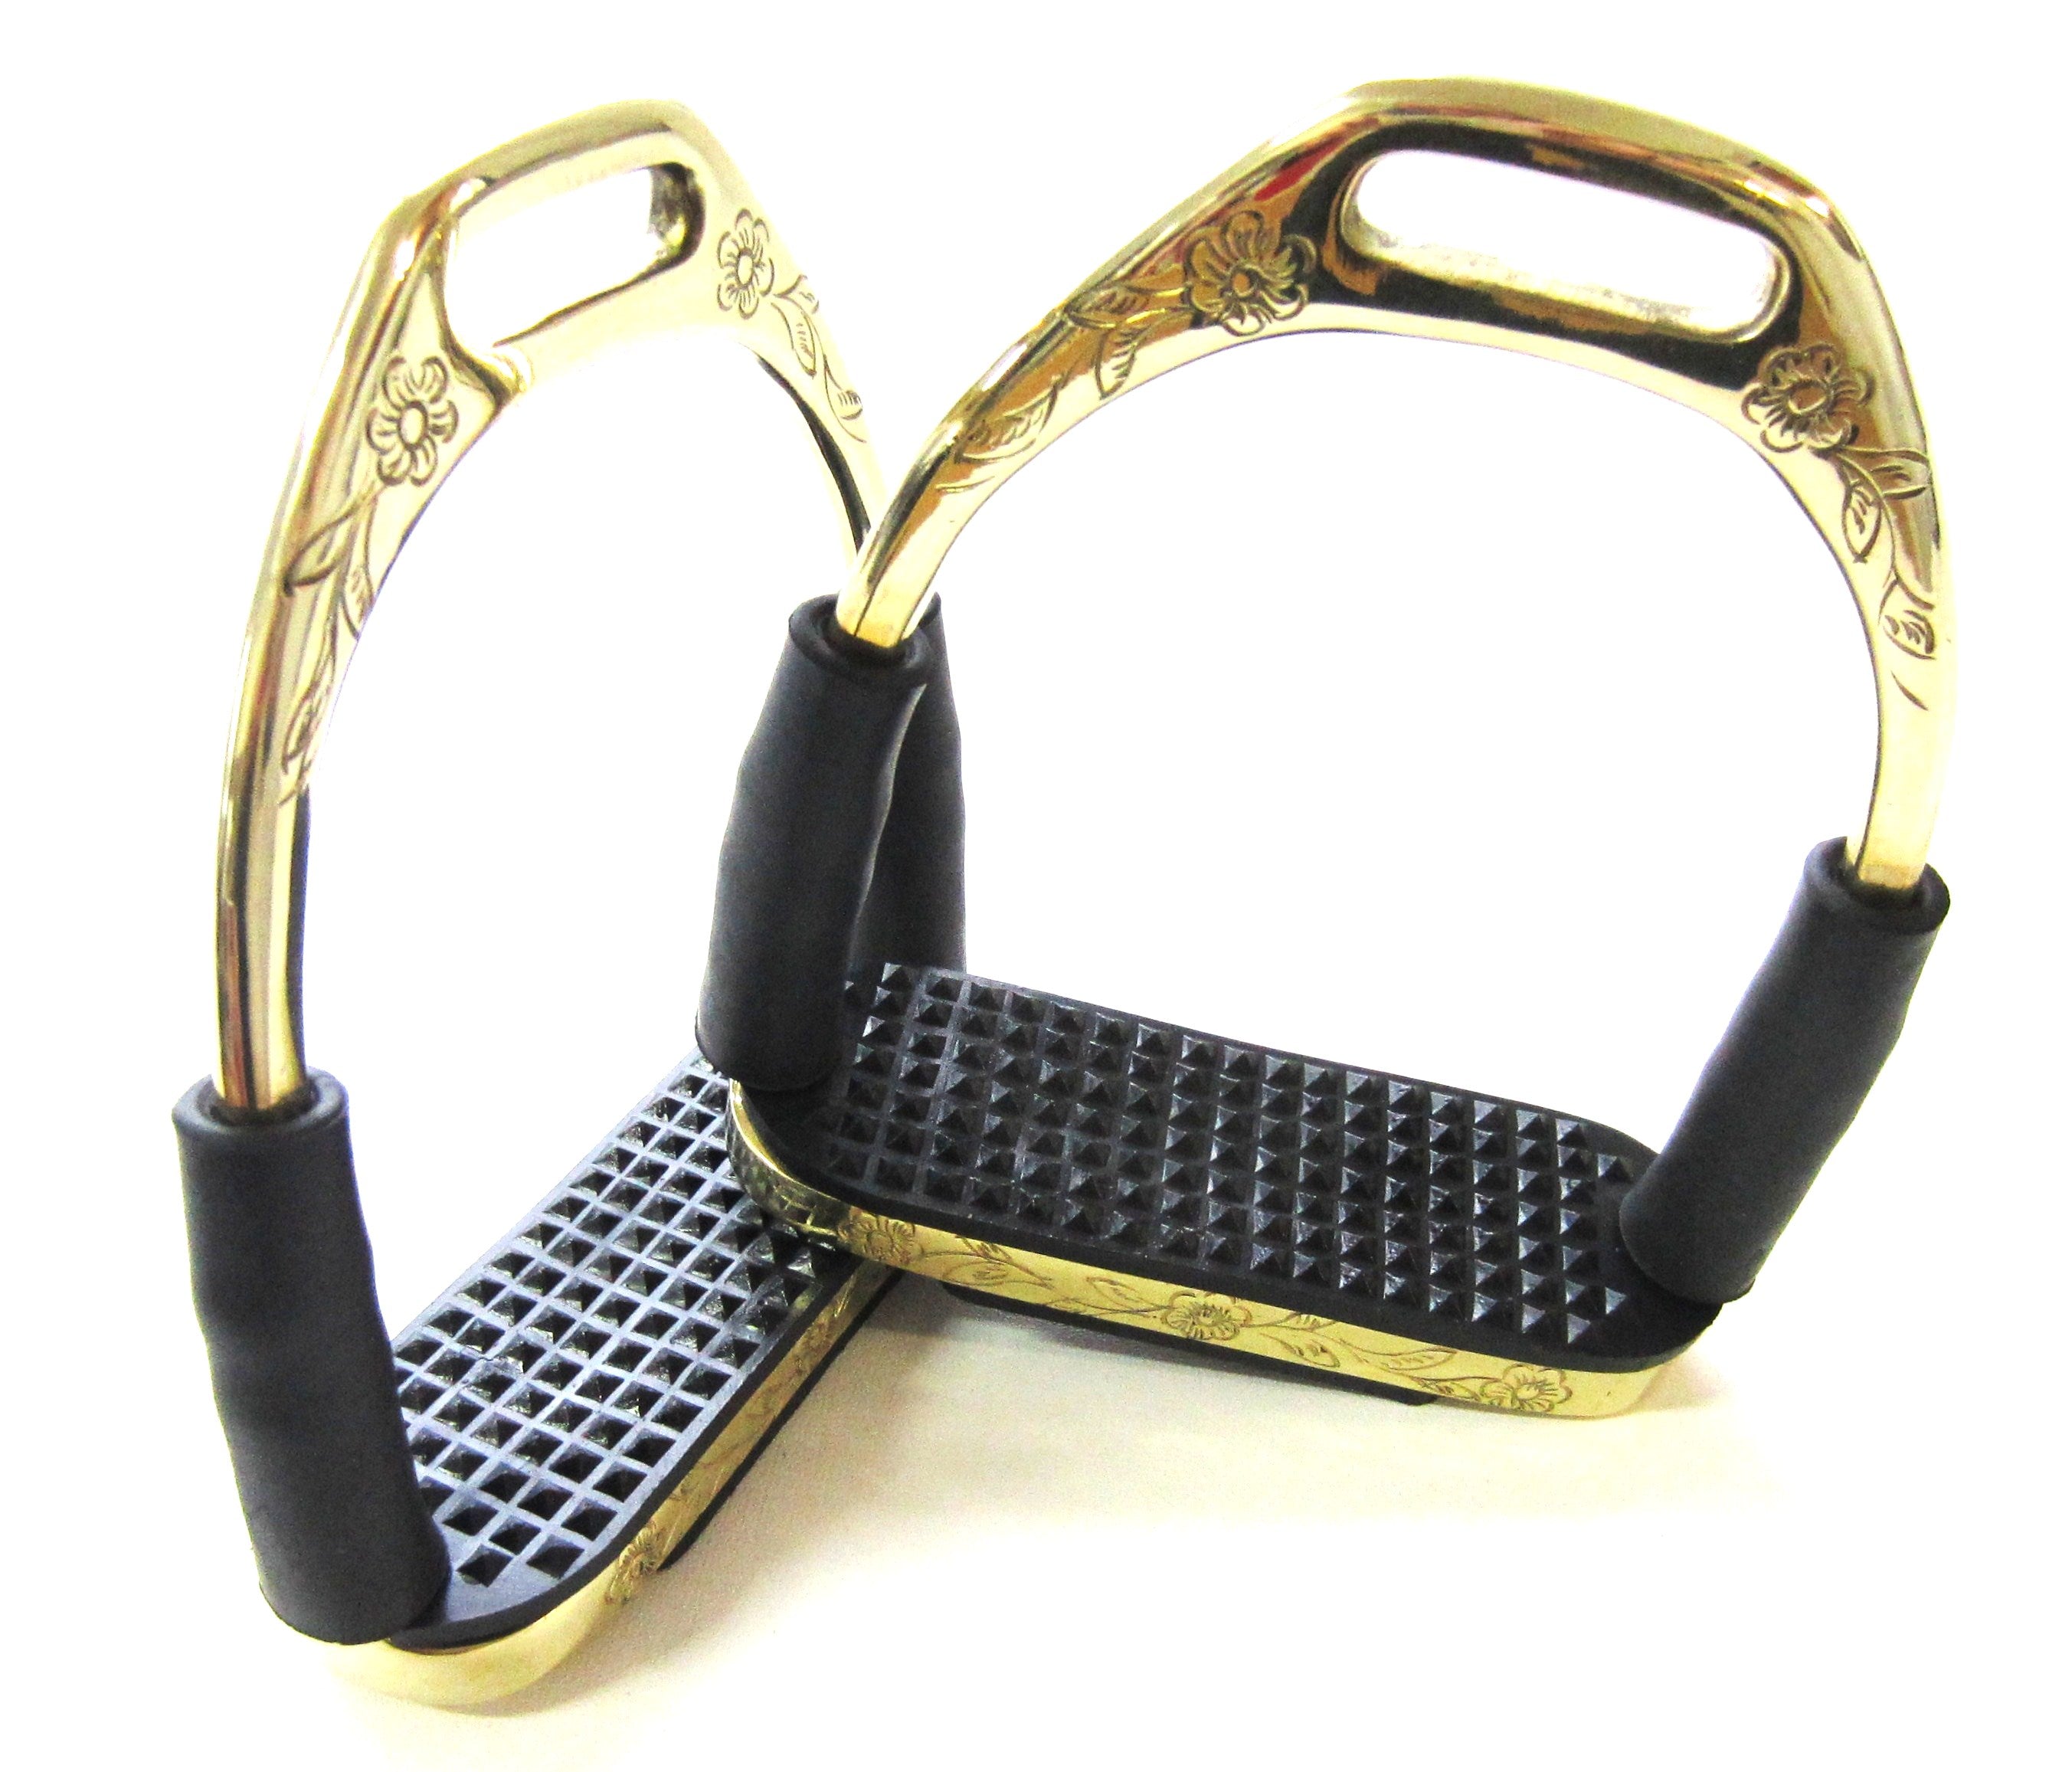 Elegant safety stirrups with joints, color in gold - brass, decorated, 1 pair